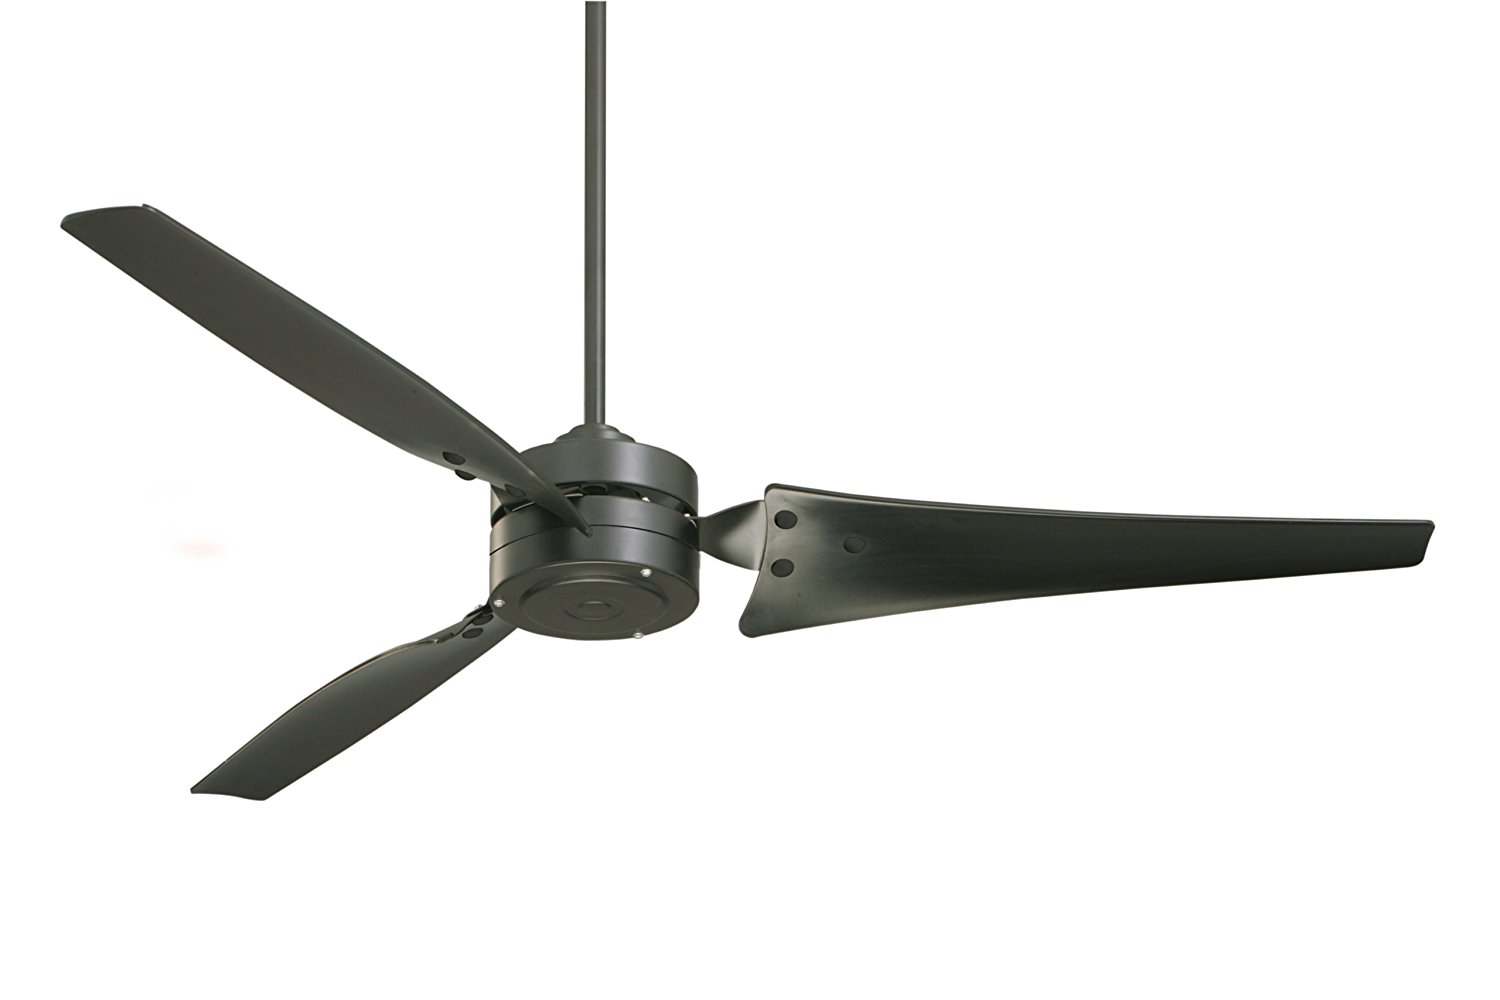 Emerson CF765BQ Ceiling Fan with 4 Speed Wall Control and 60-Inch Blades, Barbeque Black Finish